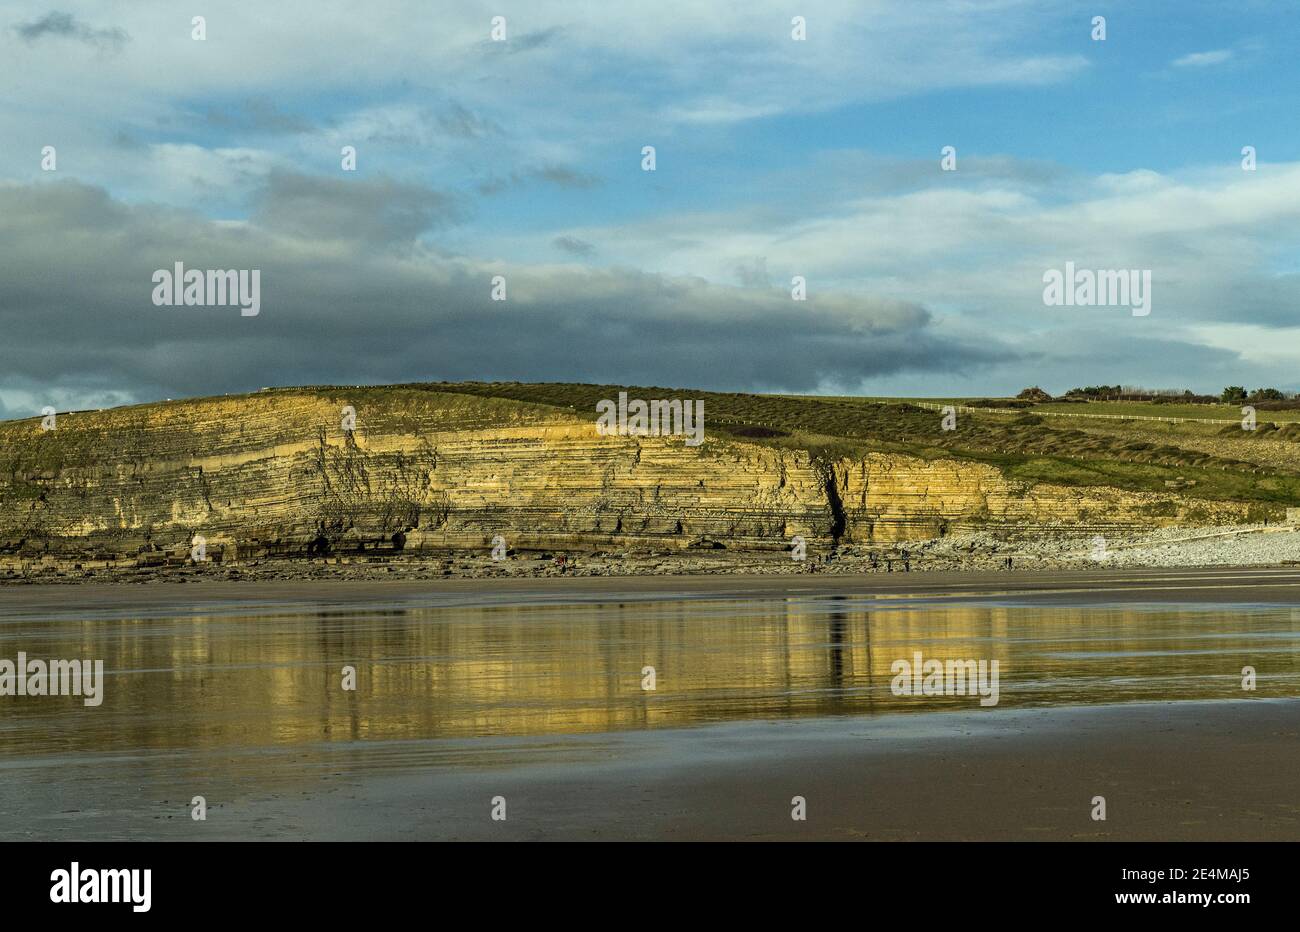 Dunraven Bay with wet sand and reflections of the nearby cliff, Glamorgan Heritage Coast, South Wales. Stock Photo